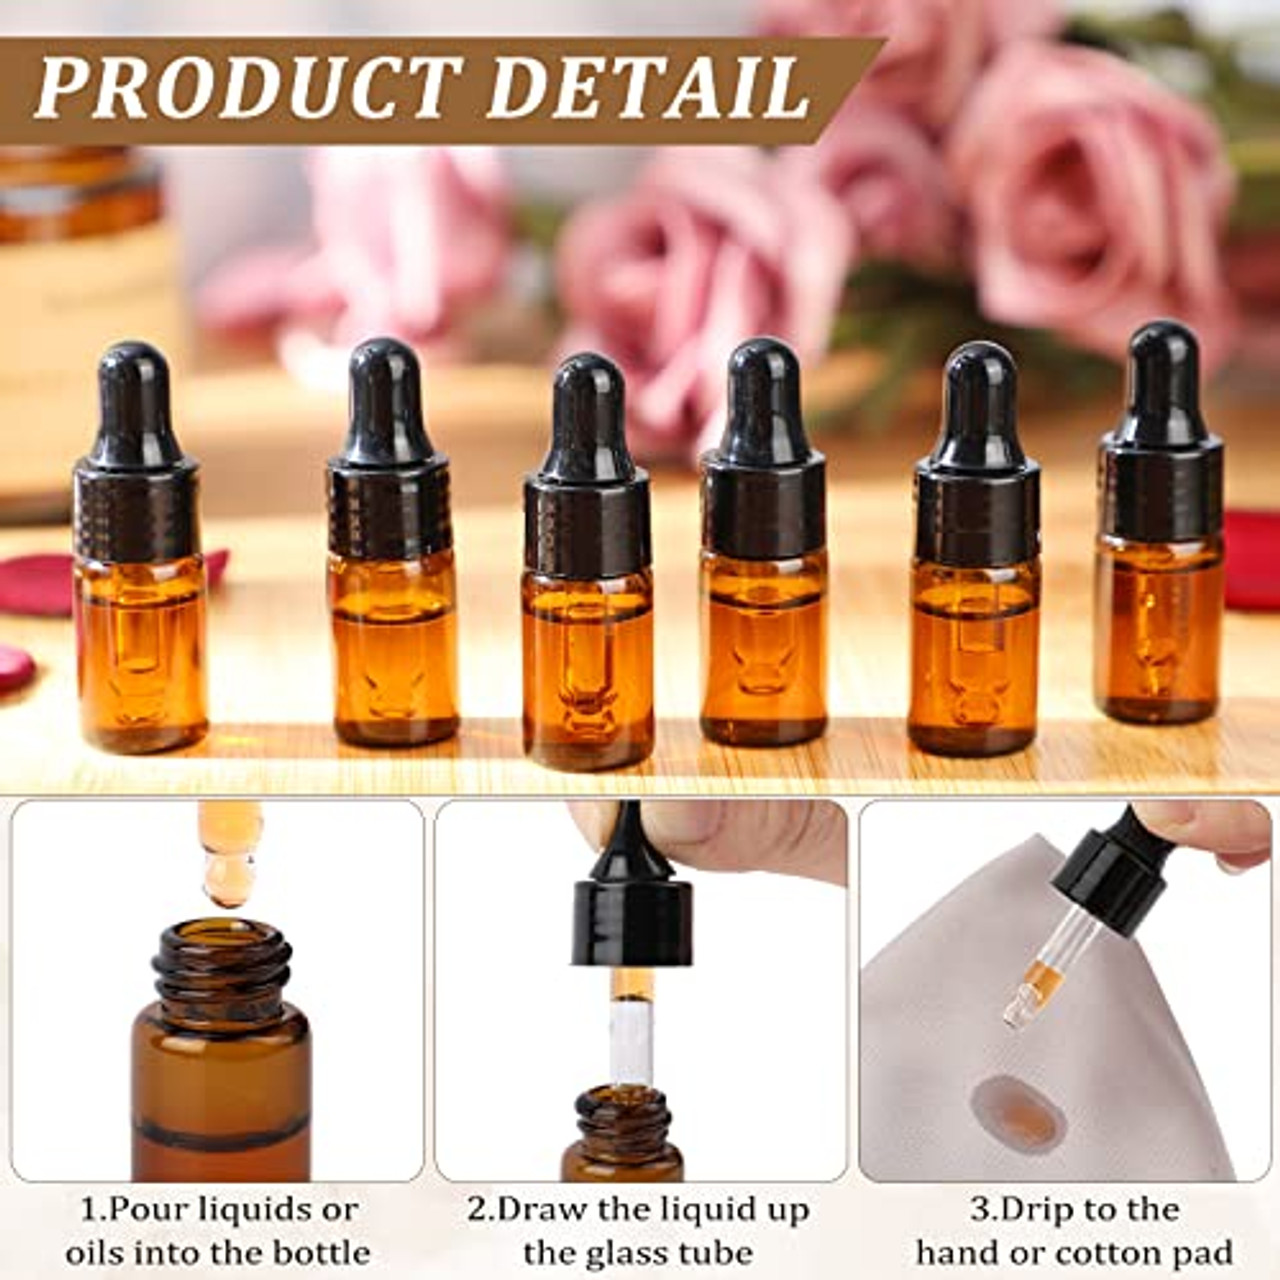 Enslz 100Pieces Amber Glass Mini Small Empty Perfume Sample Bottles Travel  Refillable Aromatherapy Essential Oils Liquid Fragrance Sample Vials With